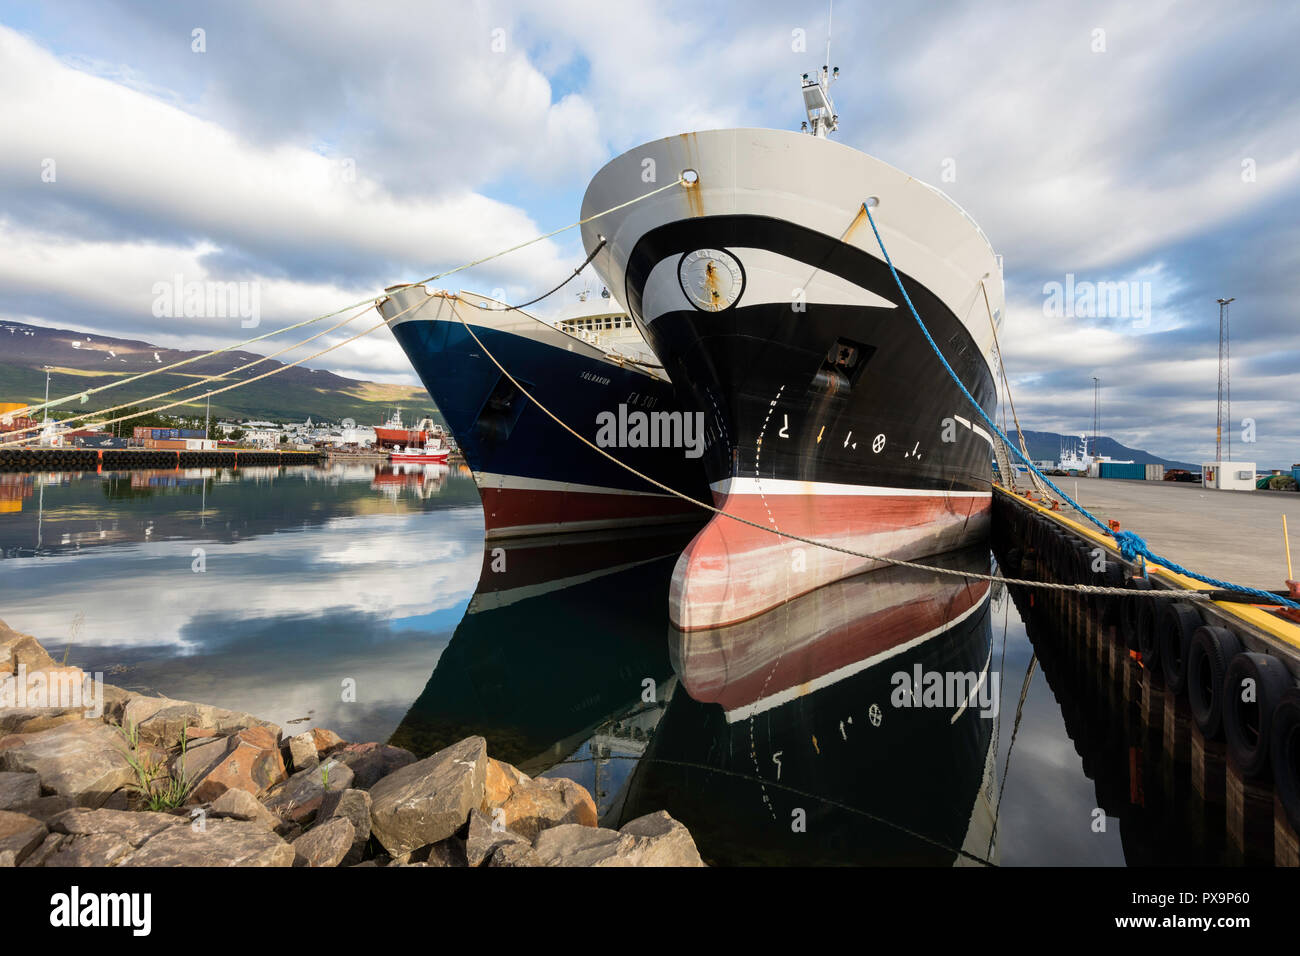 The commercial fishing and shipping harbour of Akureyri, off the north coast of Iceland. Stock Photo